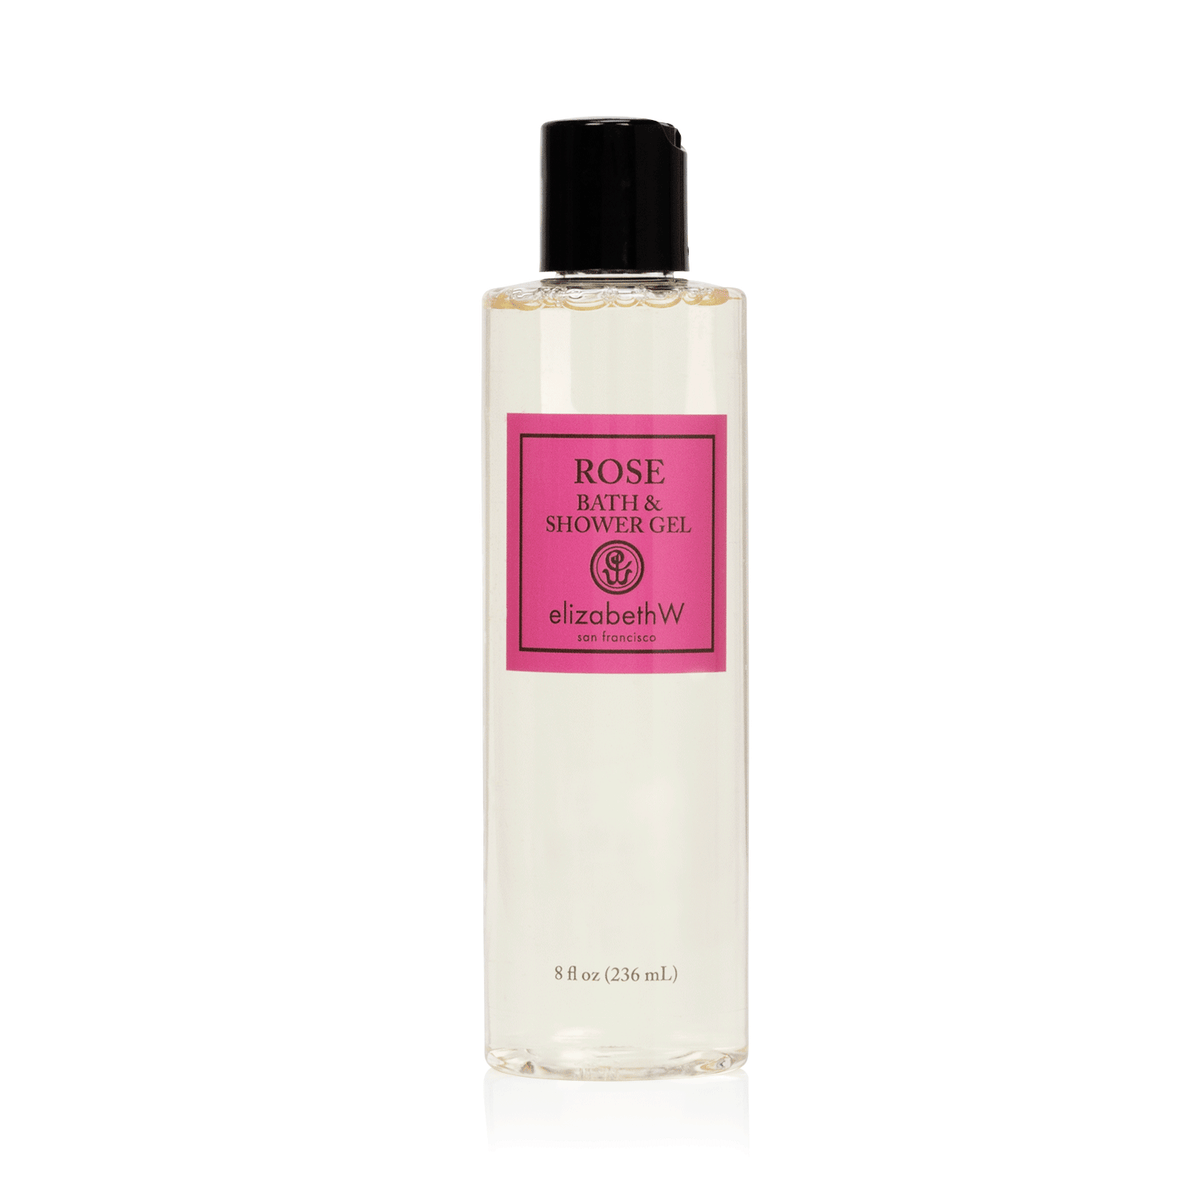 A transparent bottle of elizabeth W Signature Rose Bath & Shower Gel with a black cap, labeled in pink and white, containing 8 fl oz (236 ml) of product scented with wild roses.